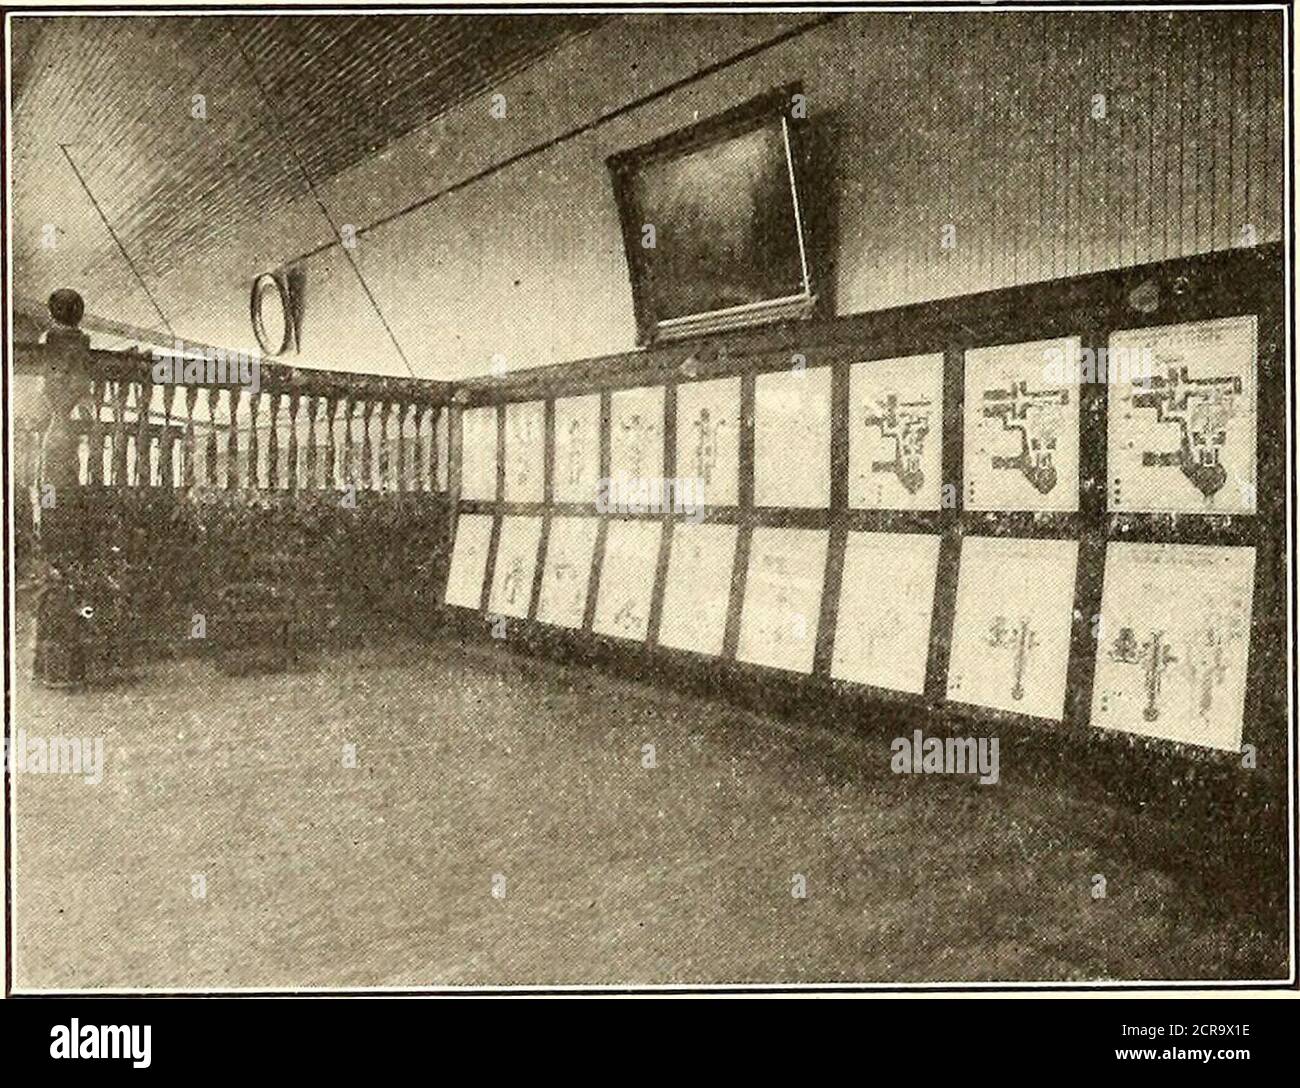 . The Street railway journal . FIG. 7.—BILLIARD ROOM IN THE OAKLAND TRACTION COM-PANYS CLUB ROOMS pany. The partitions are heavy and open pillared at the top,the construction being of a pleasing Colonial style. The entire eastern half of the second floor is occupied bythe gymnasium, lockers, lavatories and baths. The gymnasiumis a large, airy room, as may be seen from Fig. 9. It isequipped with vaulting horses, ladders, weight machines,. stantially shown by the company, and have more desire towork for its interests and welfare. In short, the clubroomsare a success and are proving profitable al Stock Photo